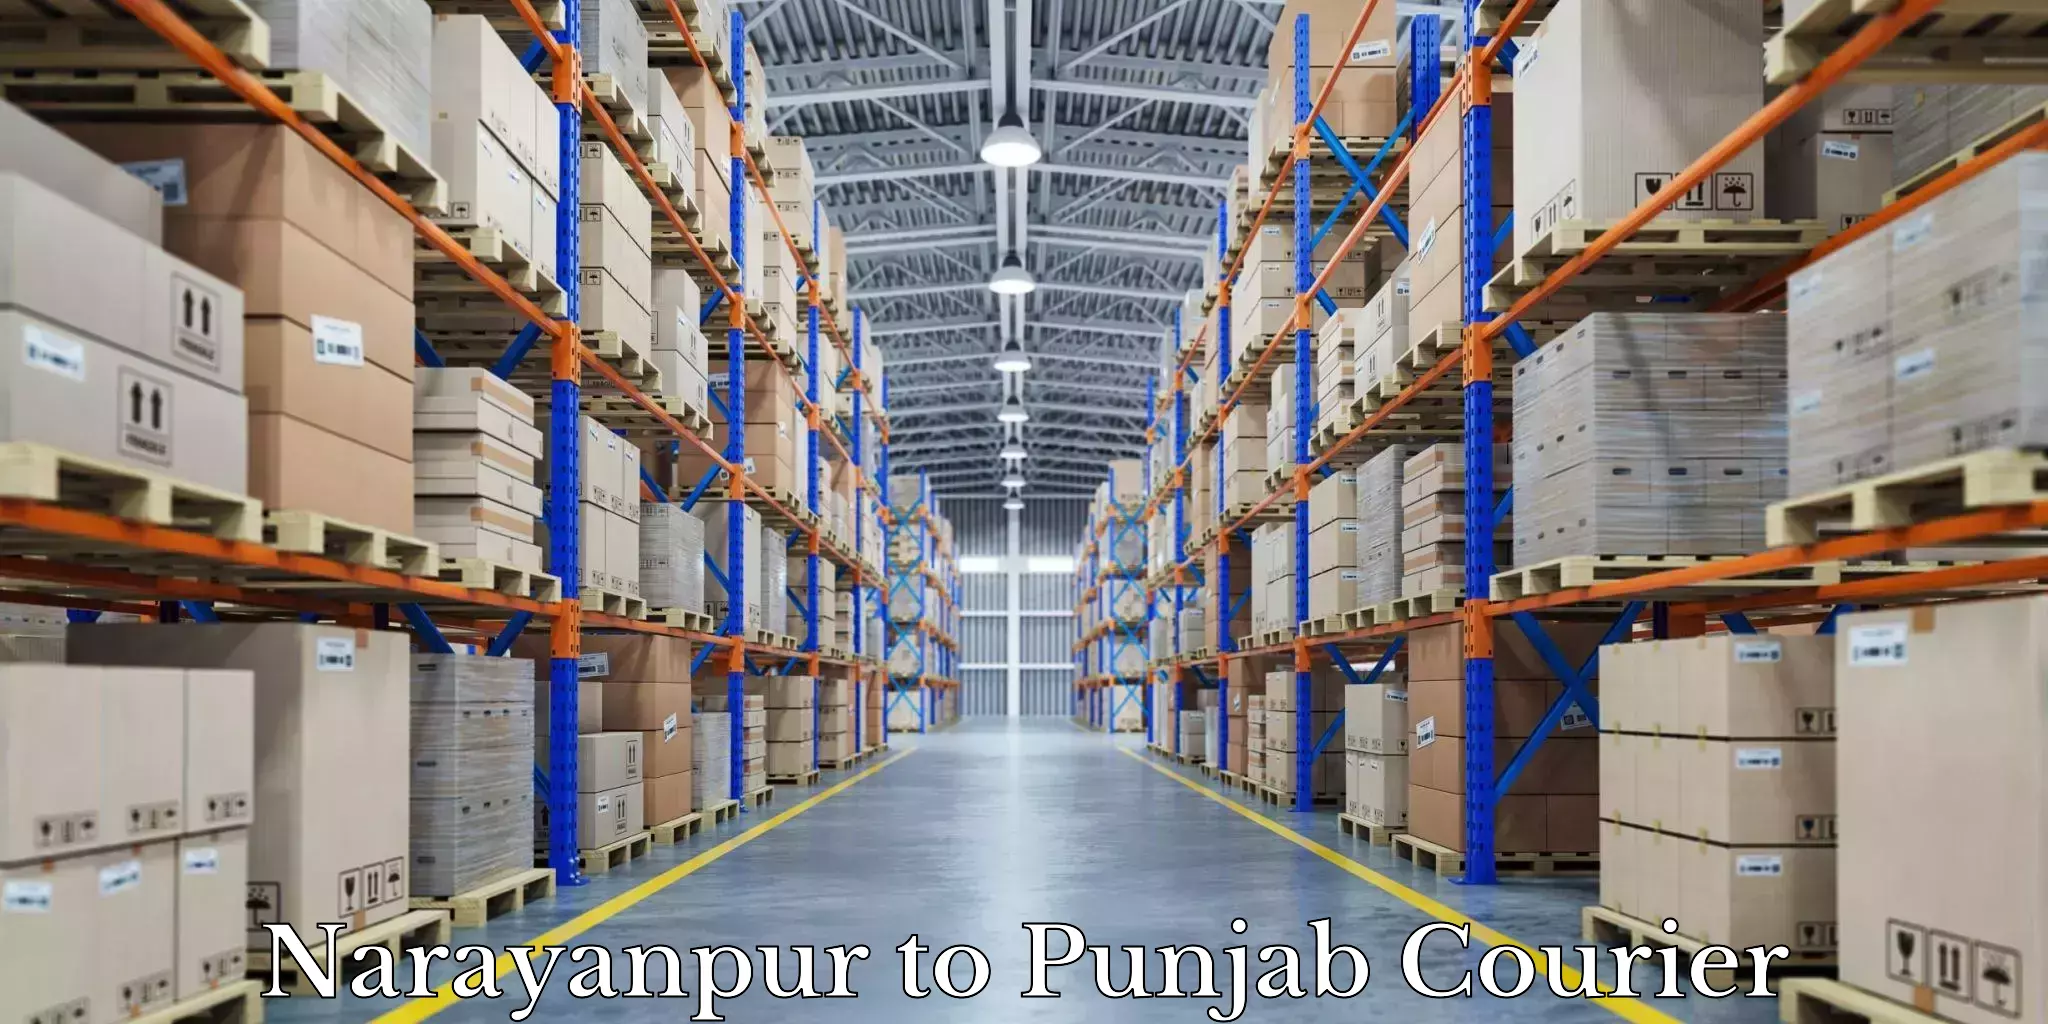 Moving and packing experts Narayanpur to Punjab